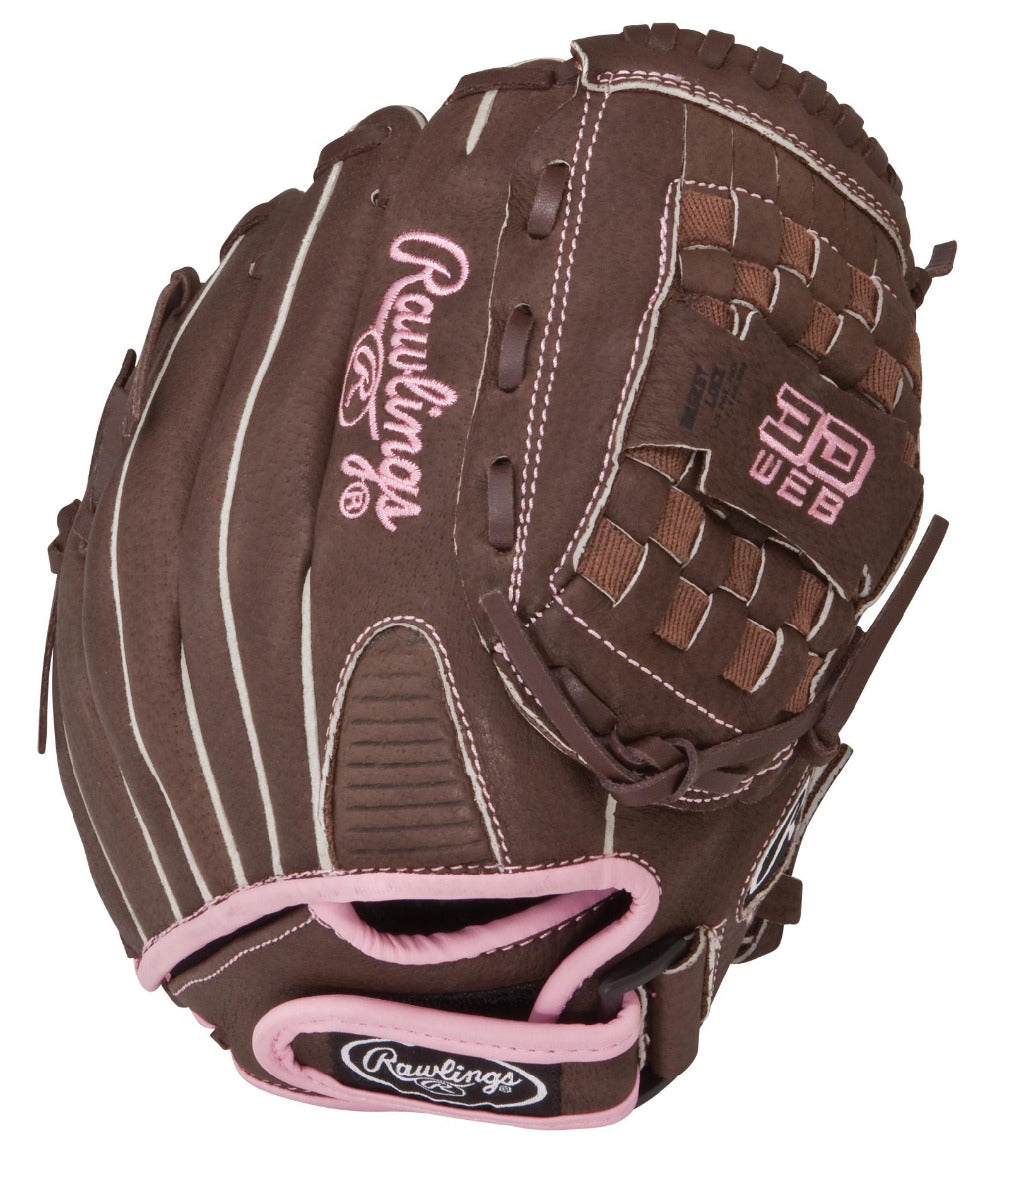 Rawlings Fastpitch Series FP110 11"